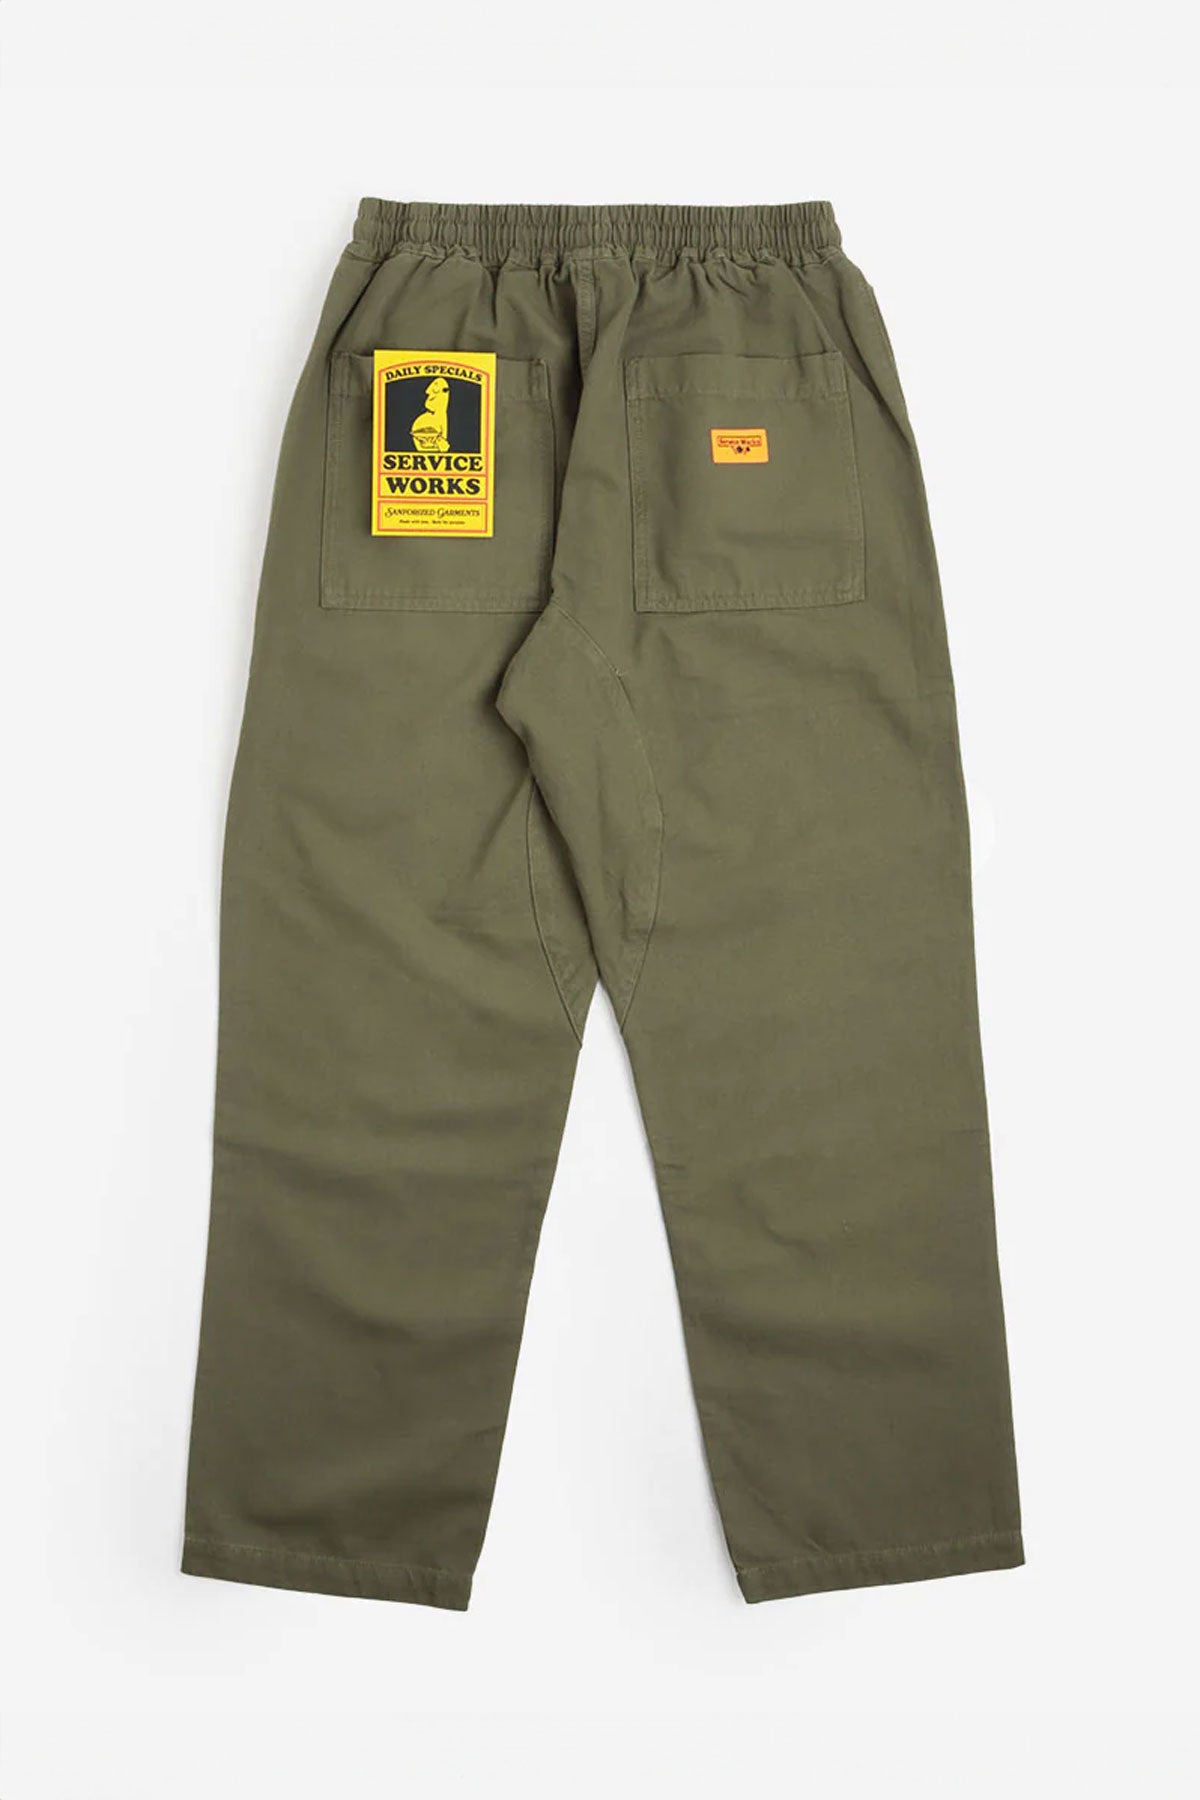 Service Works - Classic Canvas Chef Pants in Olive